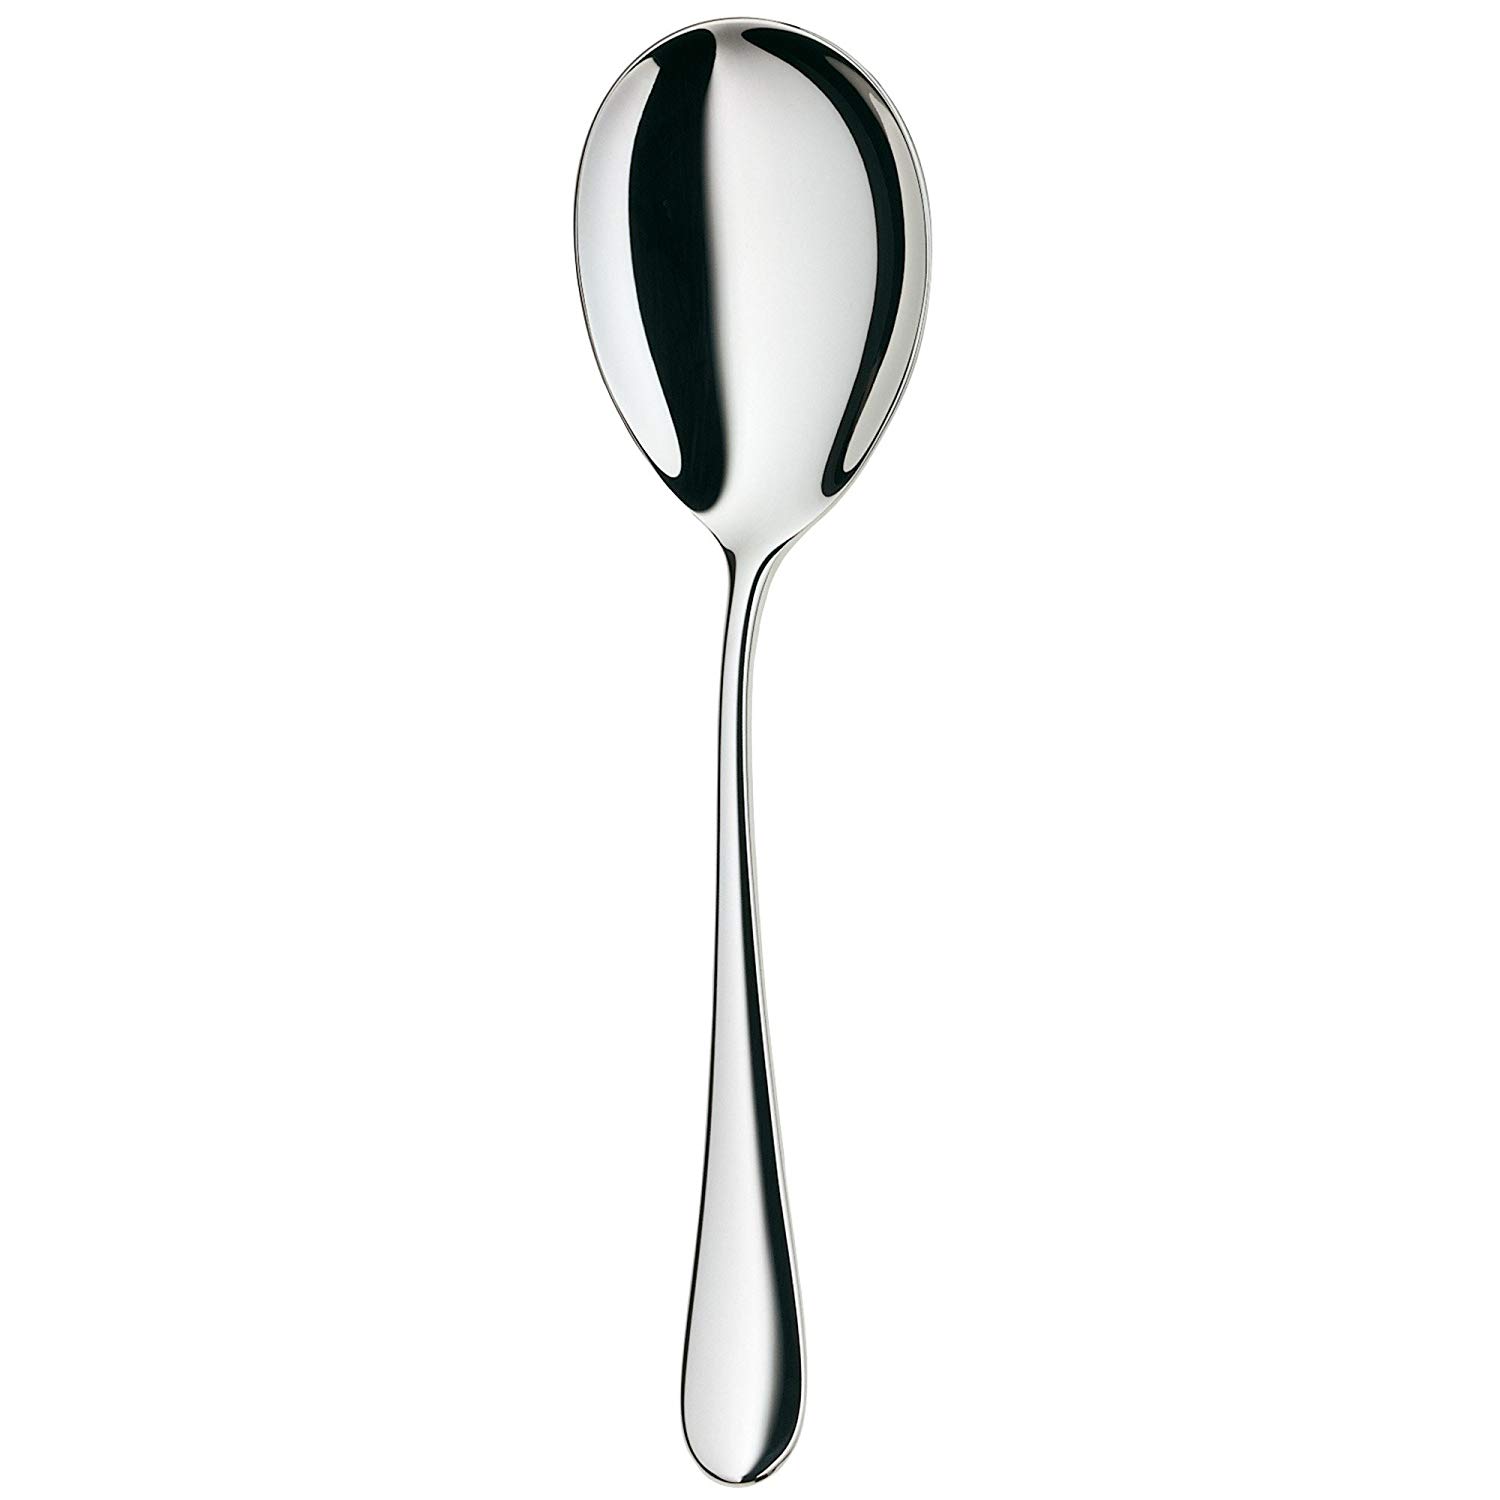 WMF Soup Ladle Jette Cromargan Protect Stainless Steel Polished Extremely Scratch Resistant